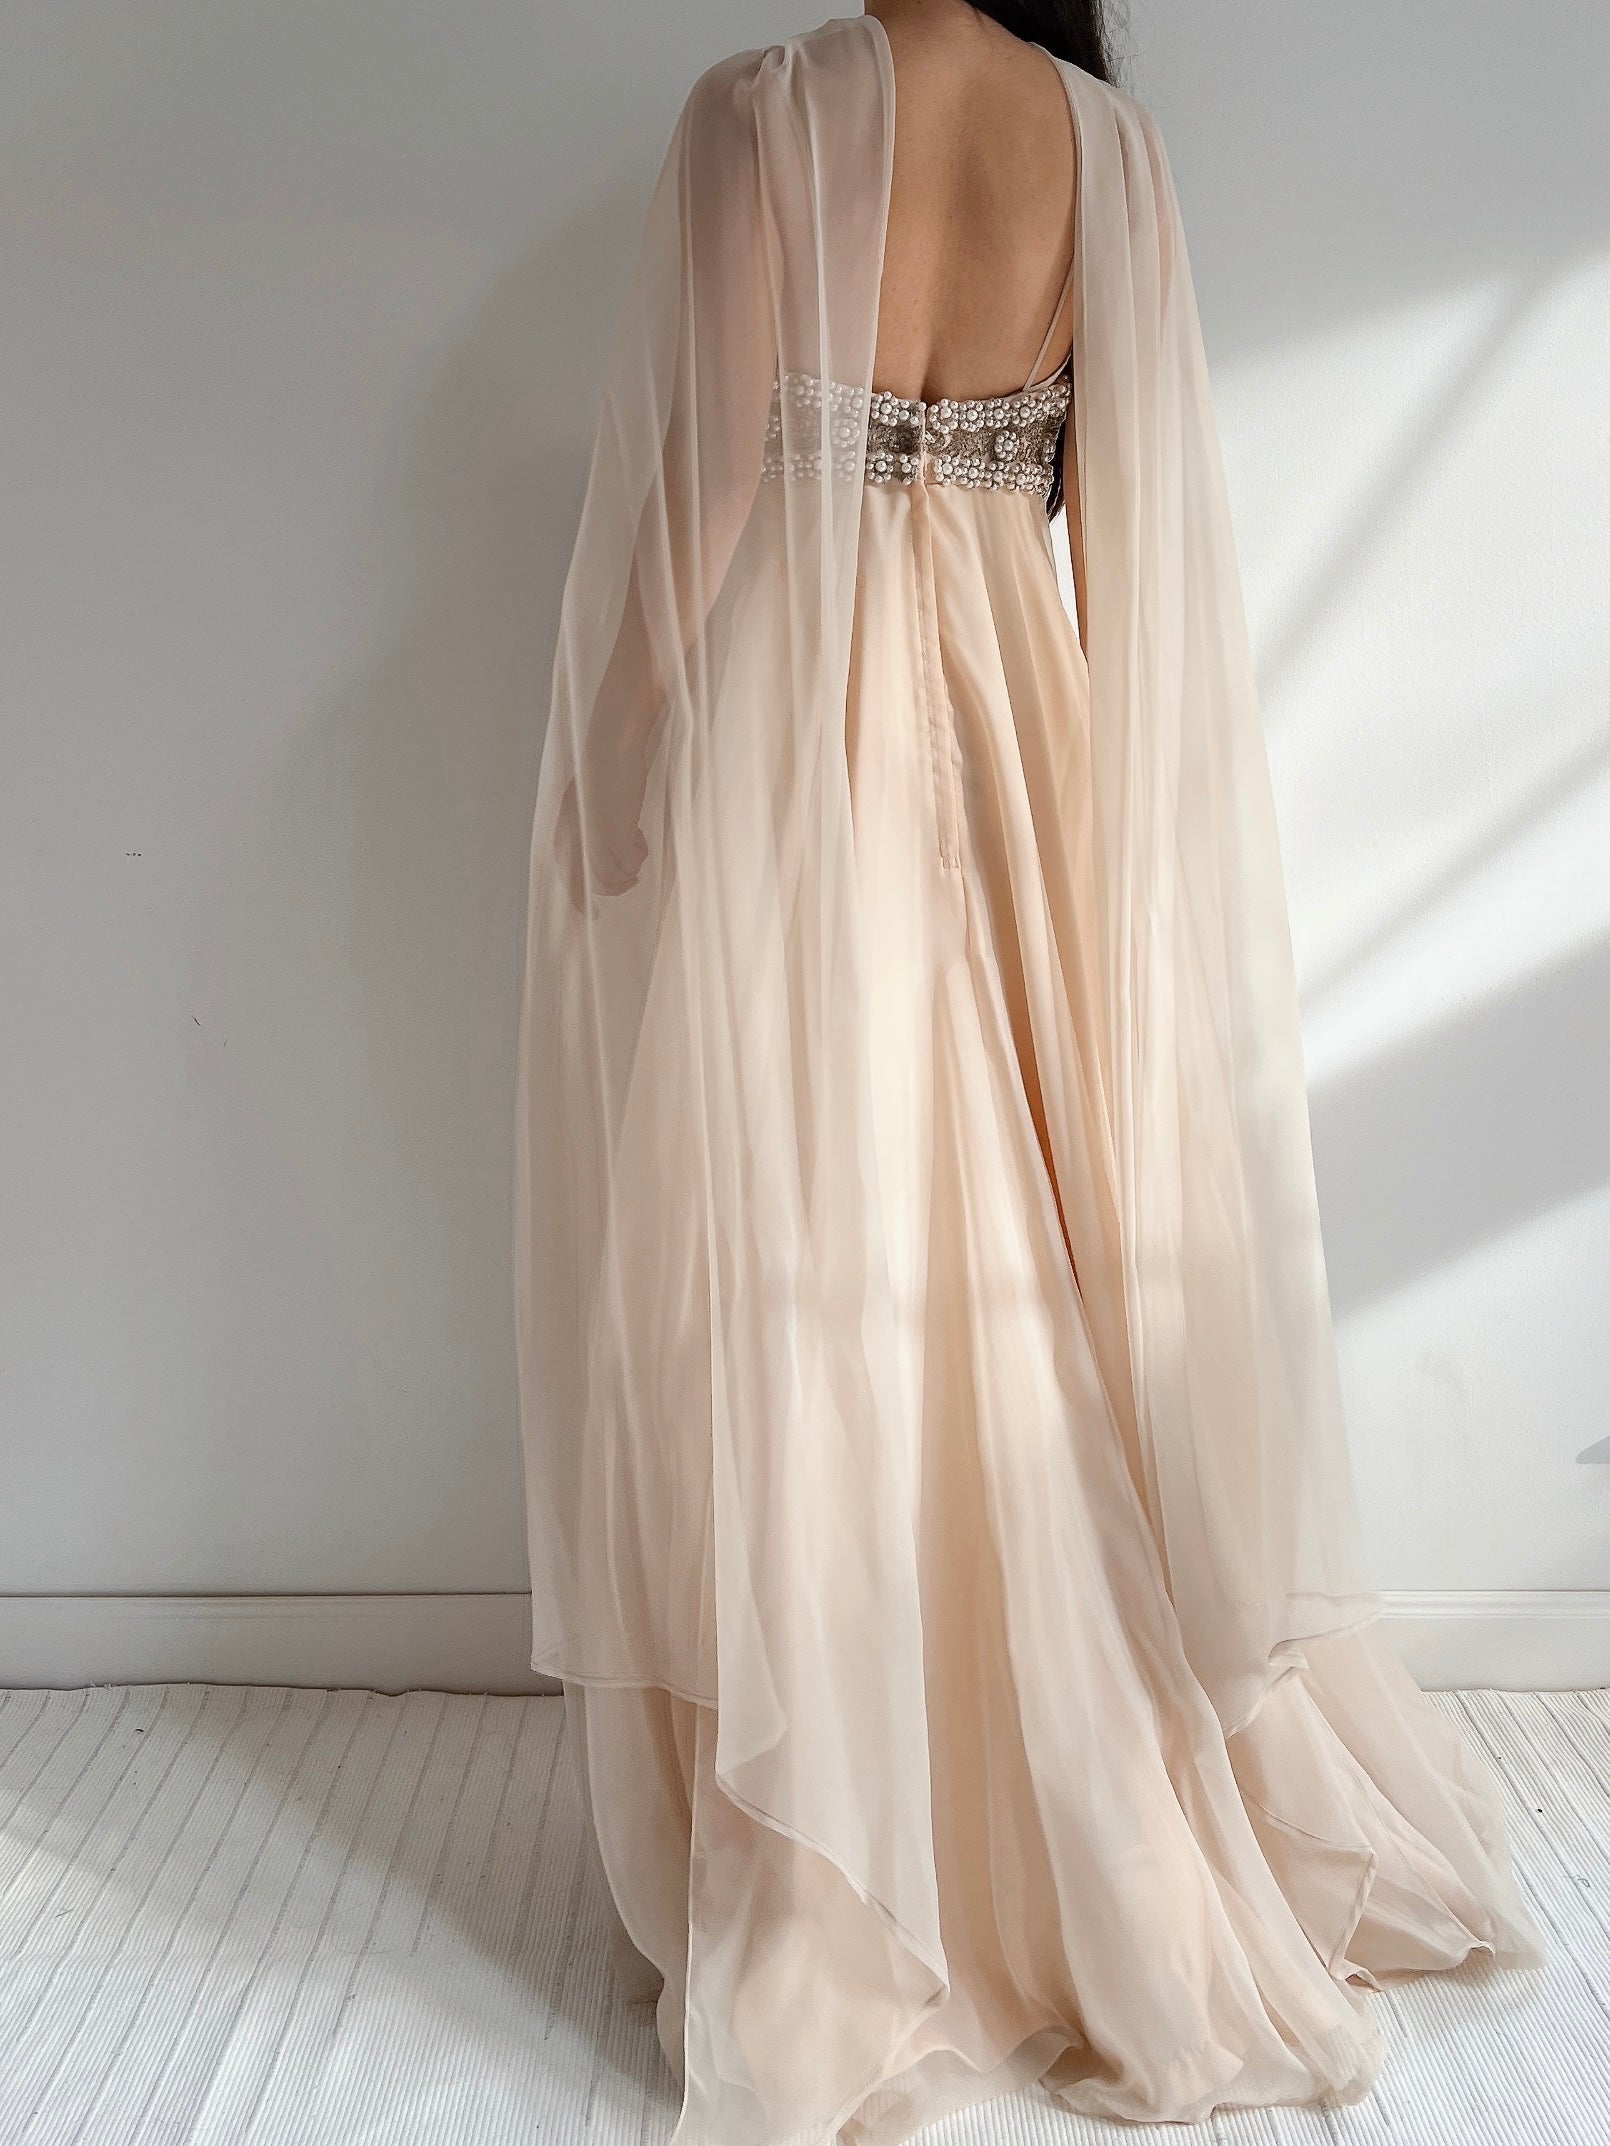 1960s Empire Chiffon Beaded Gown - XS